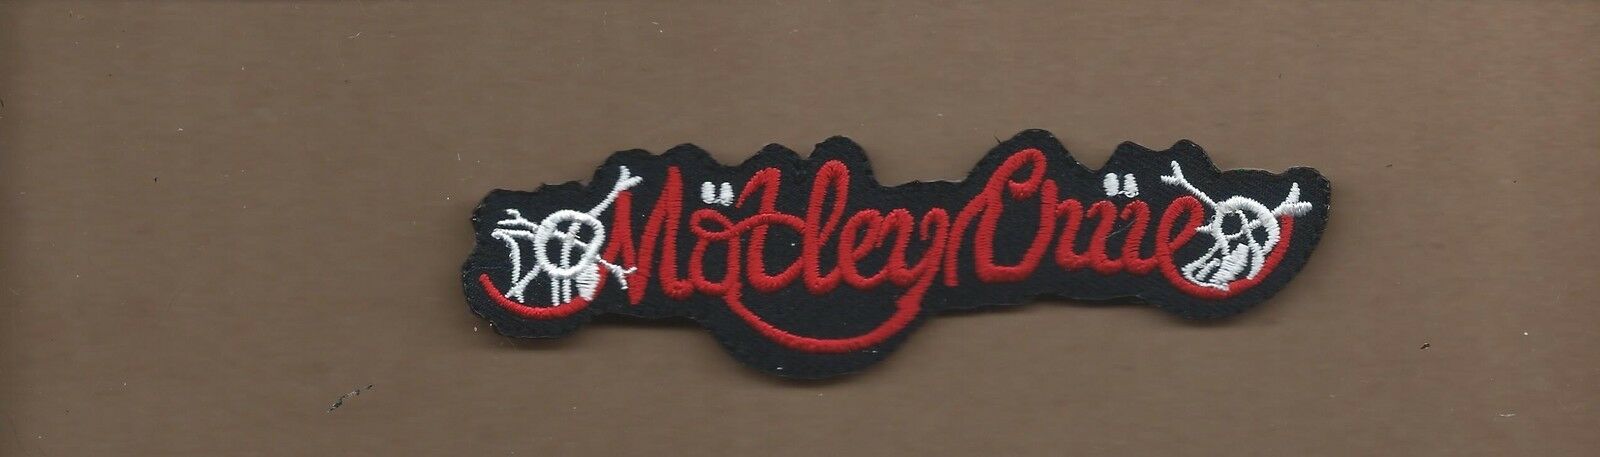 New 1 1/4 X 4 5/8 Inch Motley Crue Iron On Patch Free Shipping